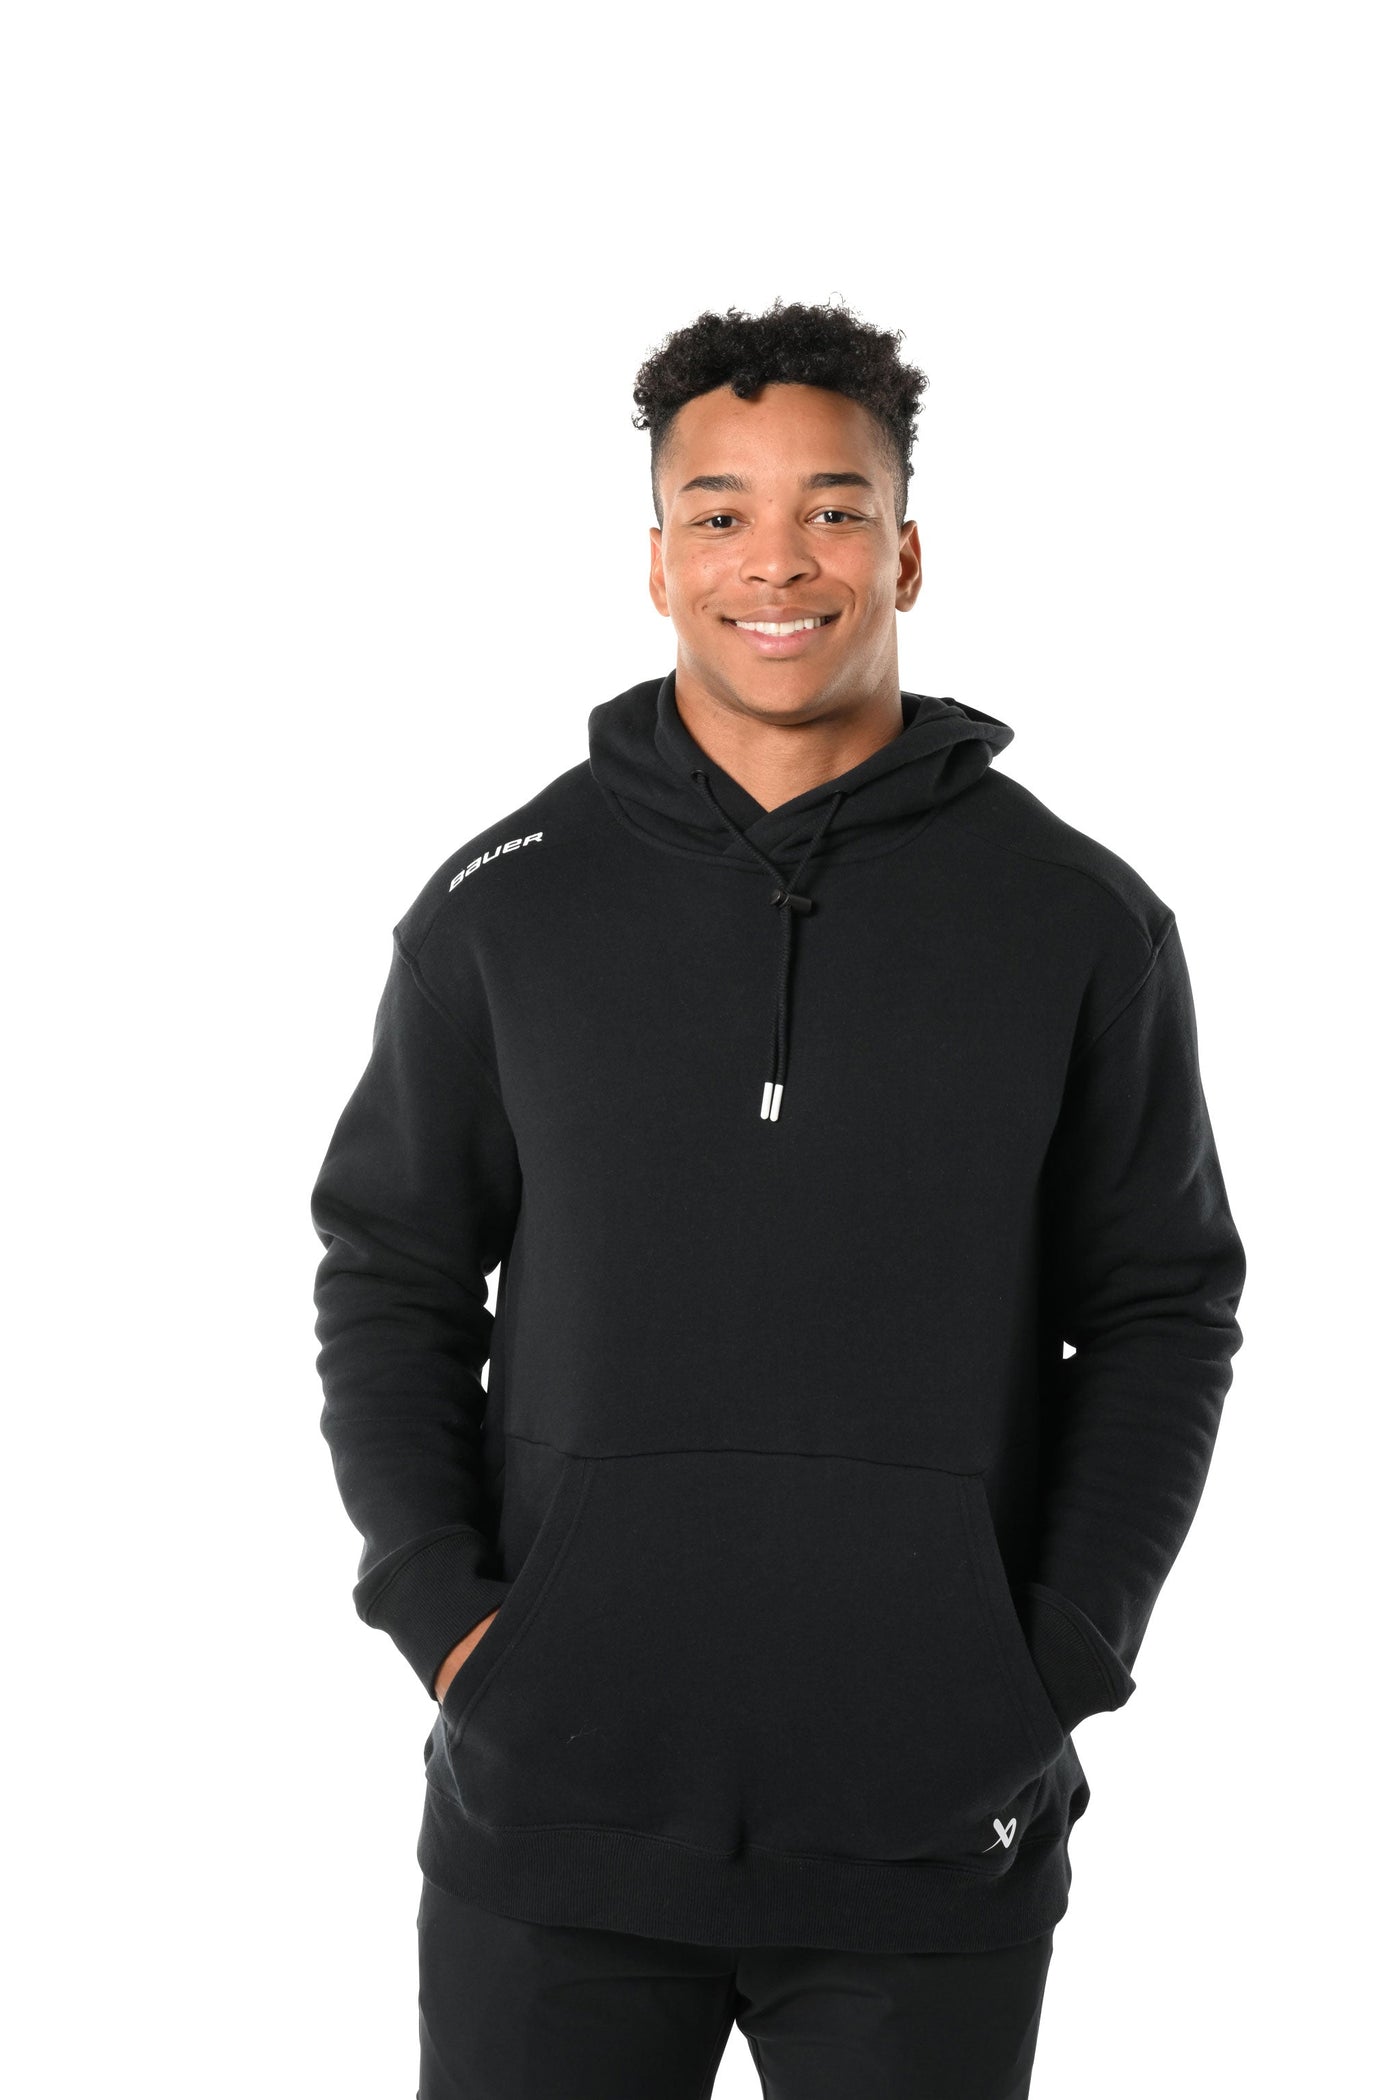 S23 Bauer Team Senior Ultimate Hoody - The Hockey Shop Source For Sports